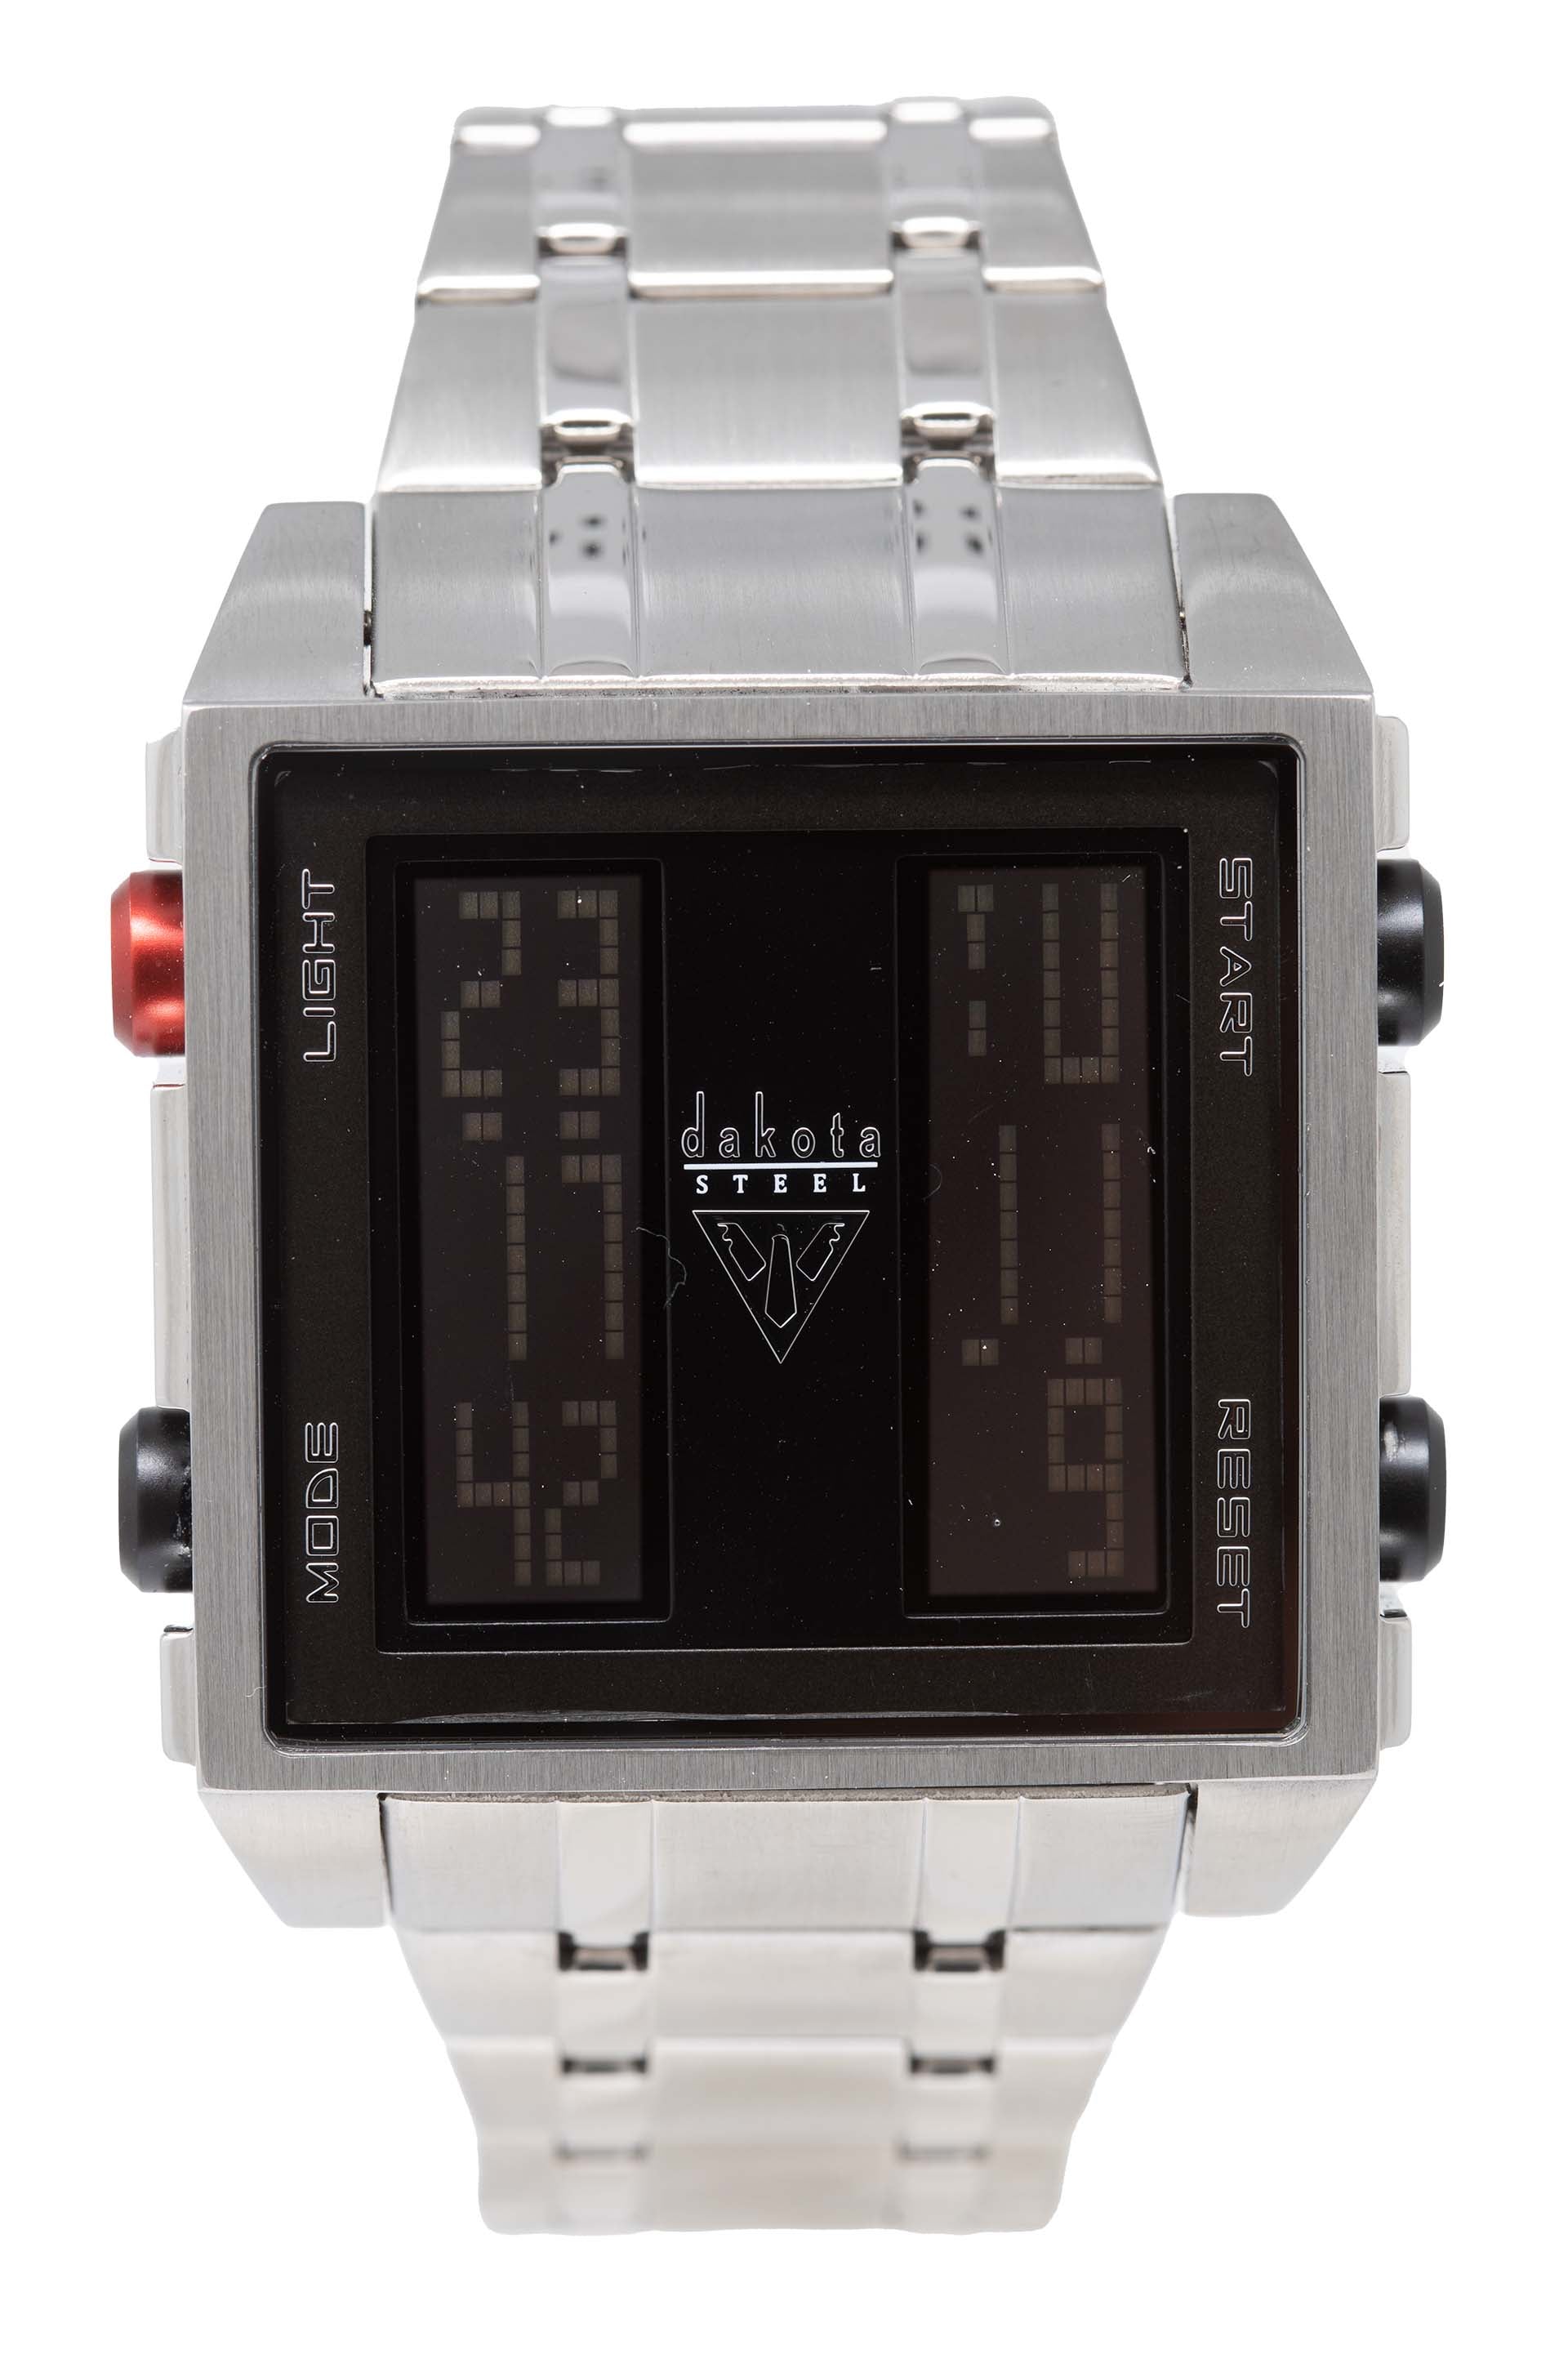 Square shape digital watch, stainless steel| Alibaba.com